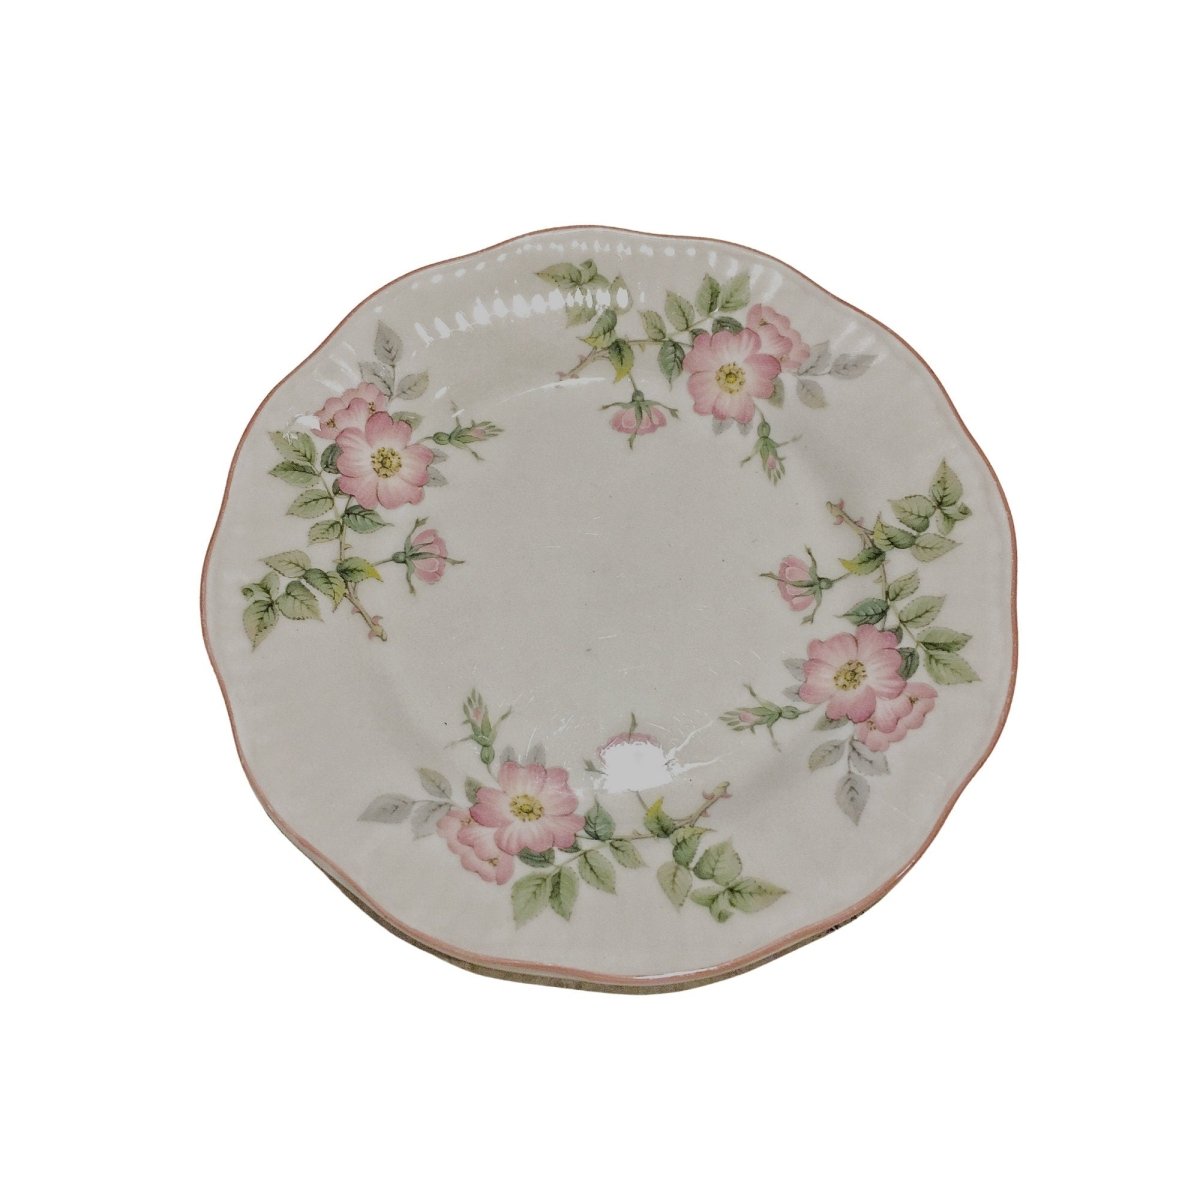 Queen's Rosina | Fabulous Flared & Fluted China Tea Trio | dusty pink briar roses - Chinamania.shop